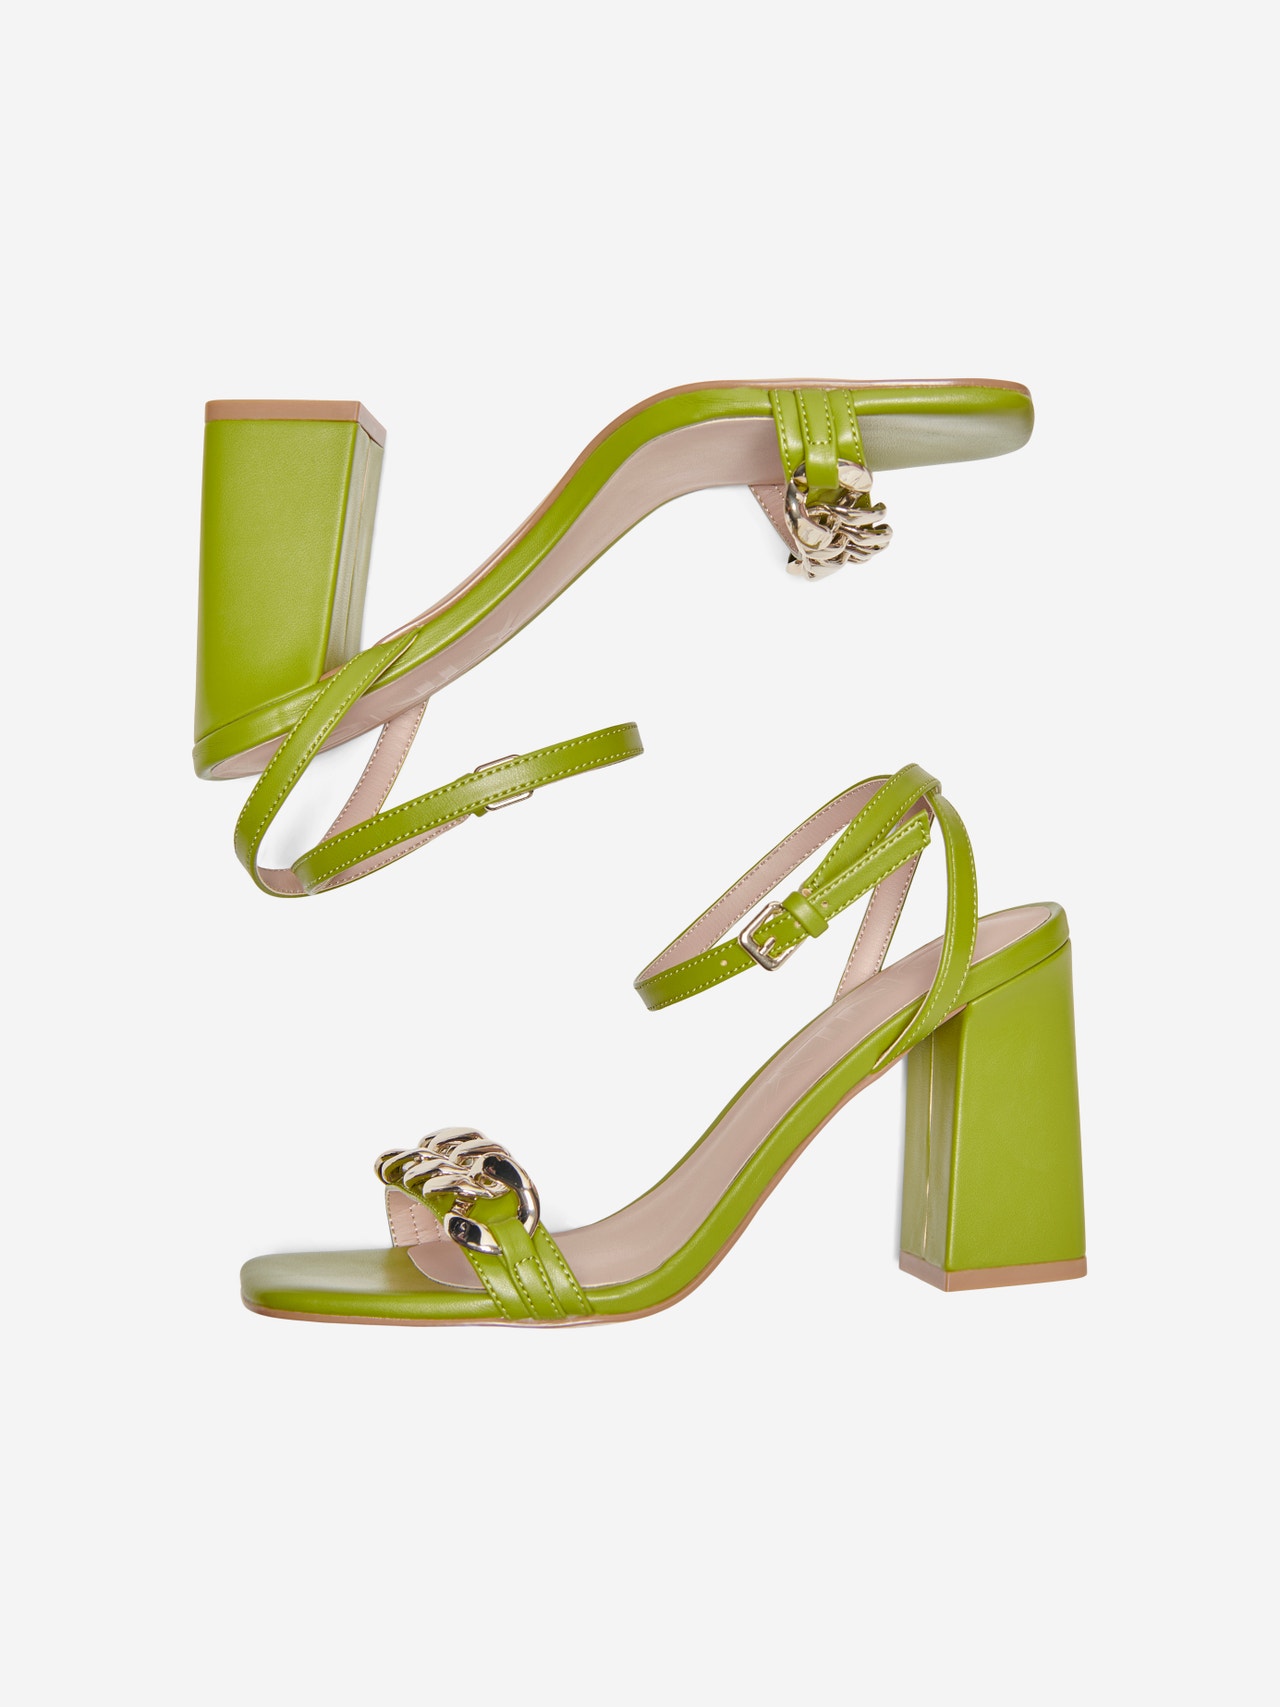 ONLY Heels with adjustable strap -Green Ash - 15288444